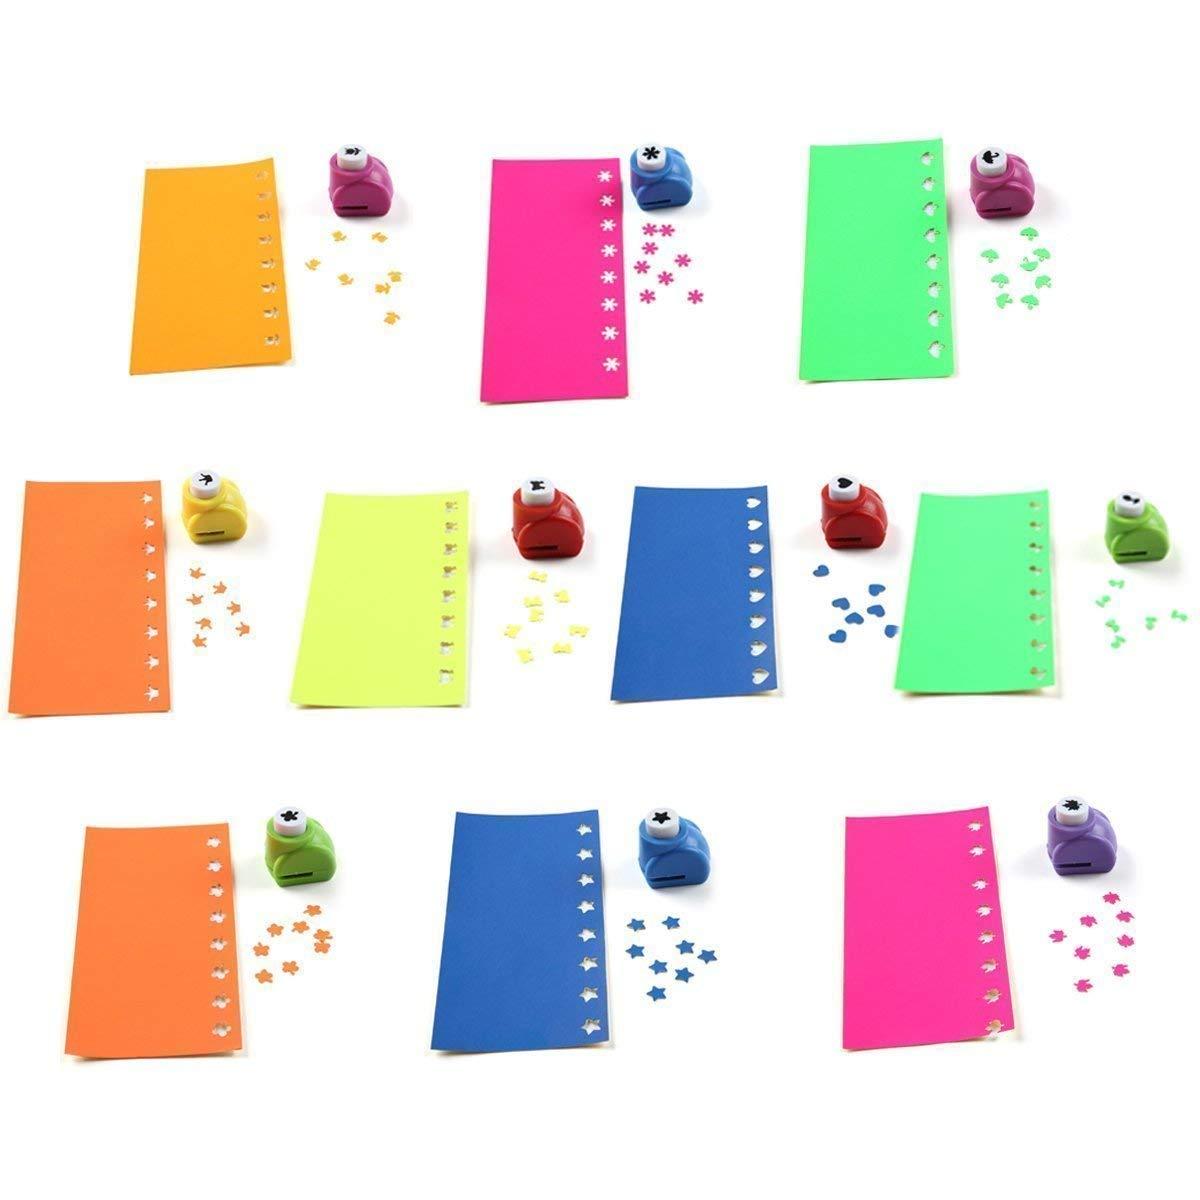 LoveInUSA Punch Craft Set 10 Pack Hole Punch Shapes Hole Punch